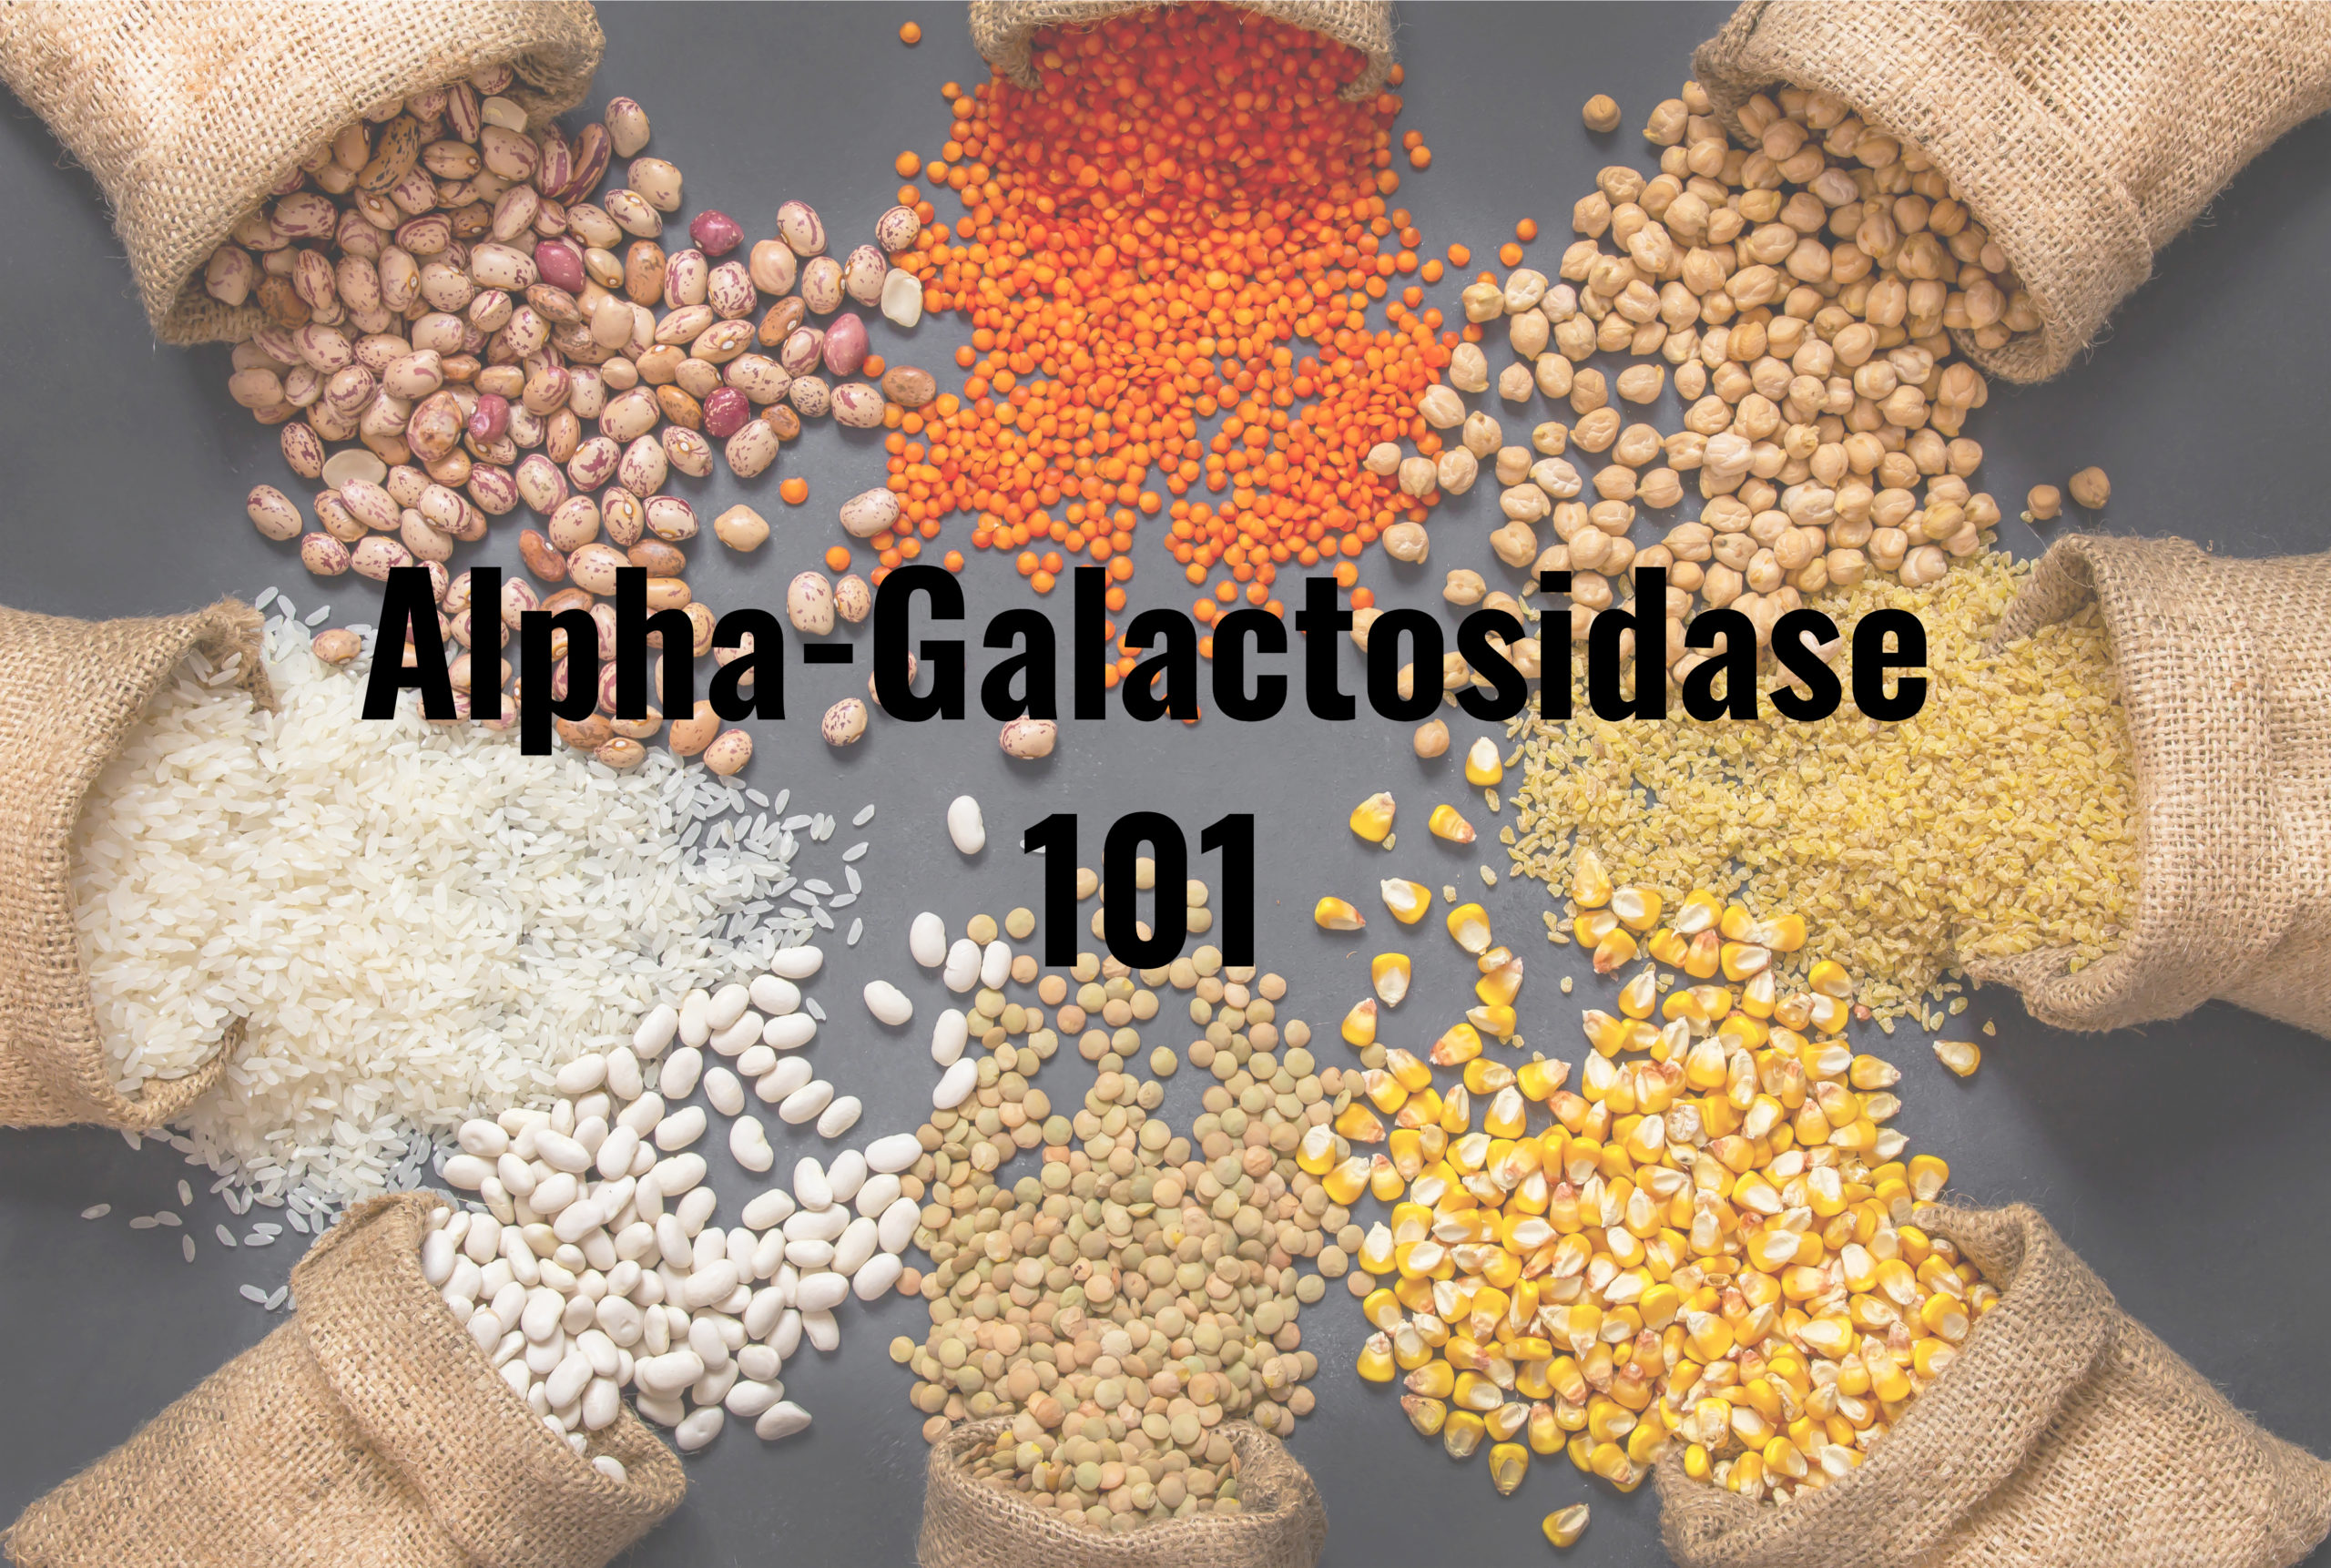 Alpha-Galactosidase 101. Everything you wanted to know about this digestive enzyme and more.